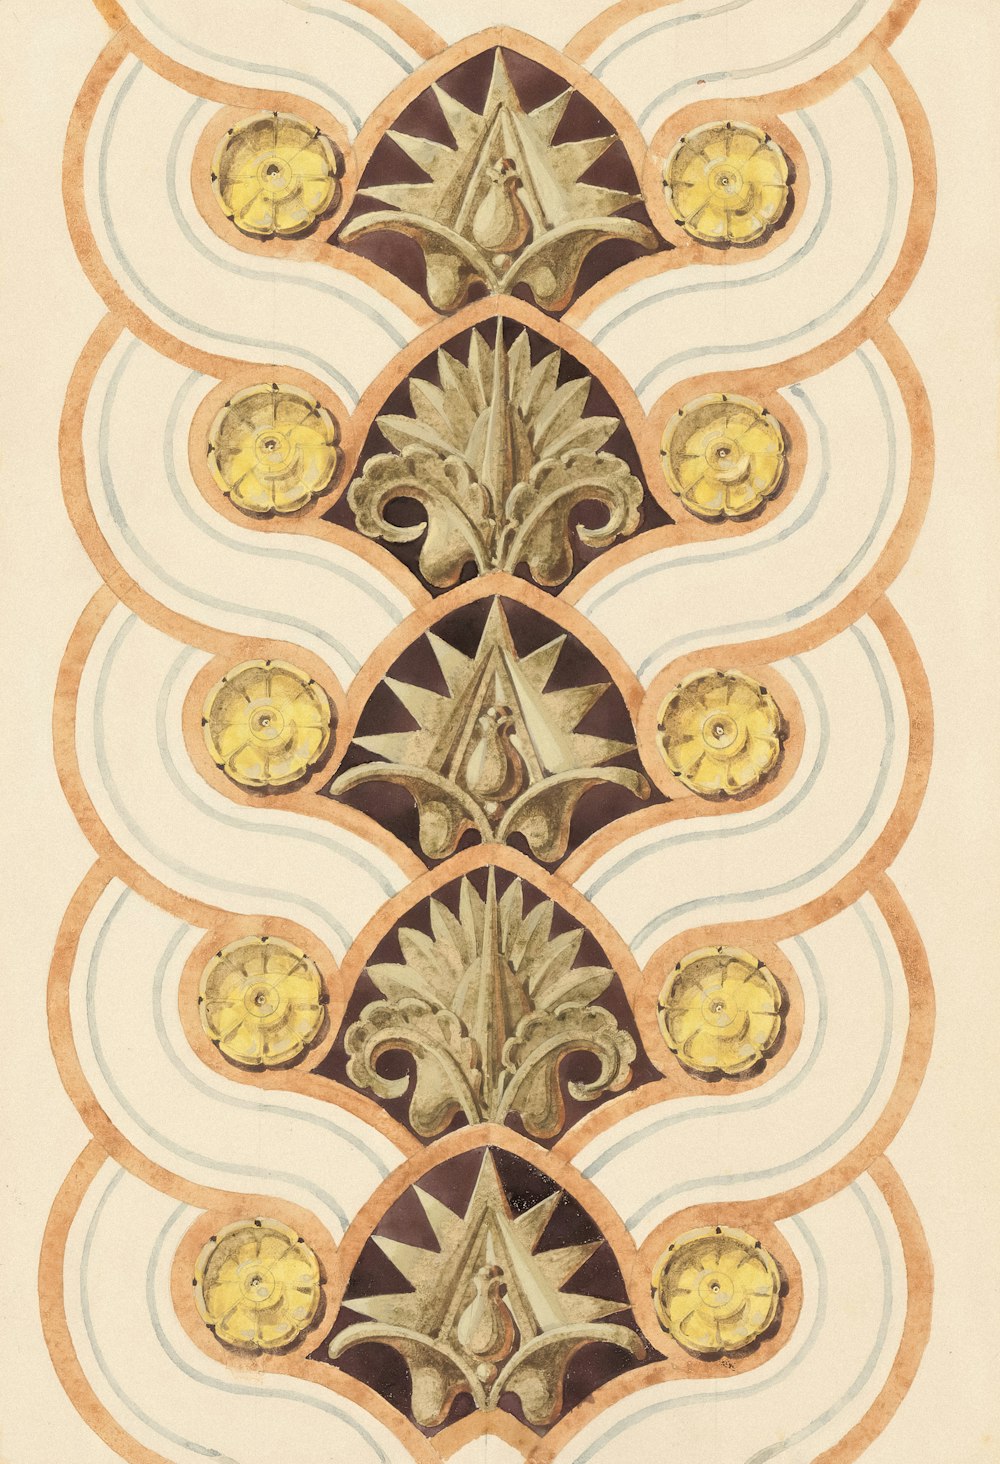 a drawing of a design for a wall hanging